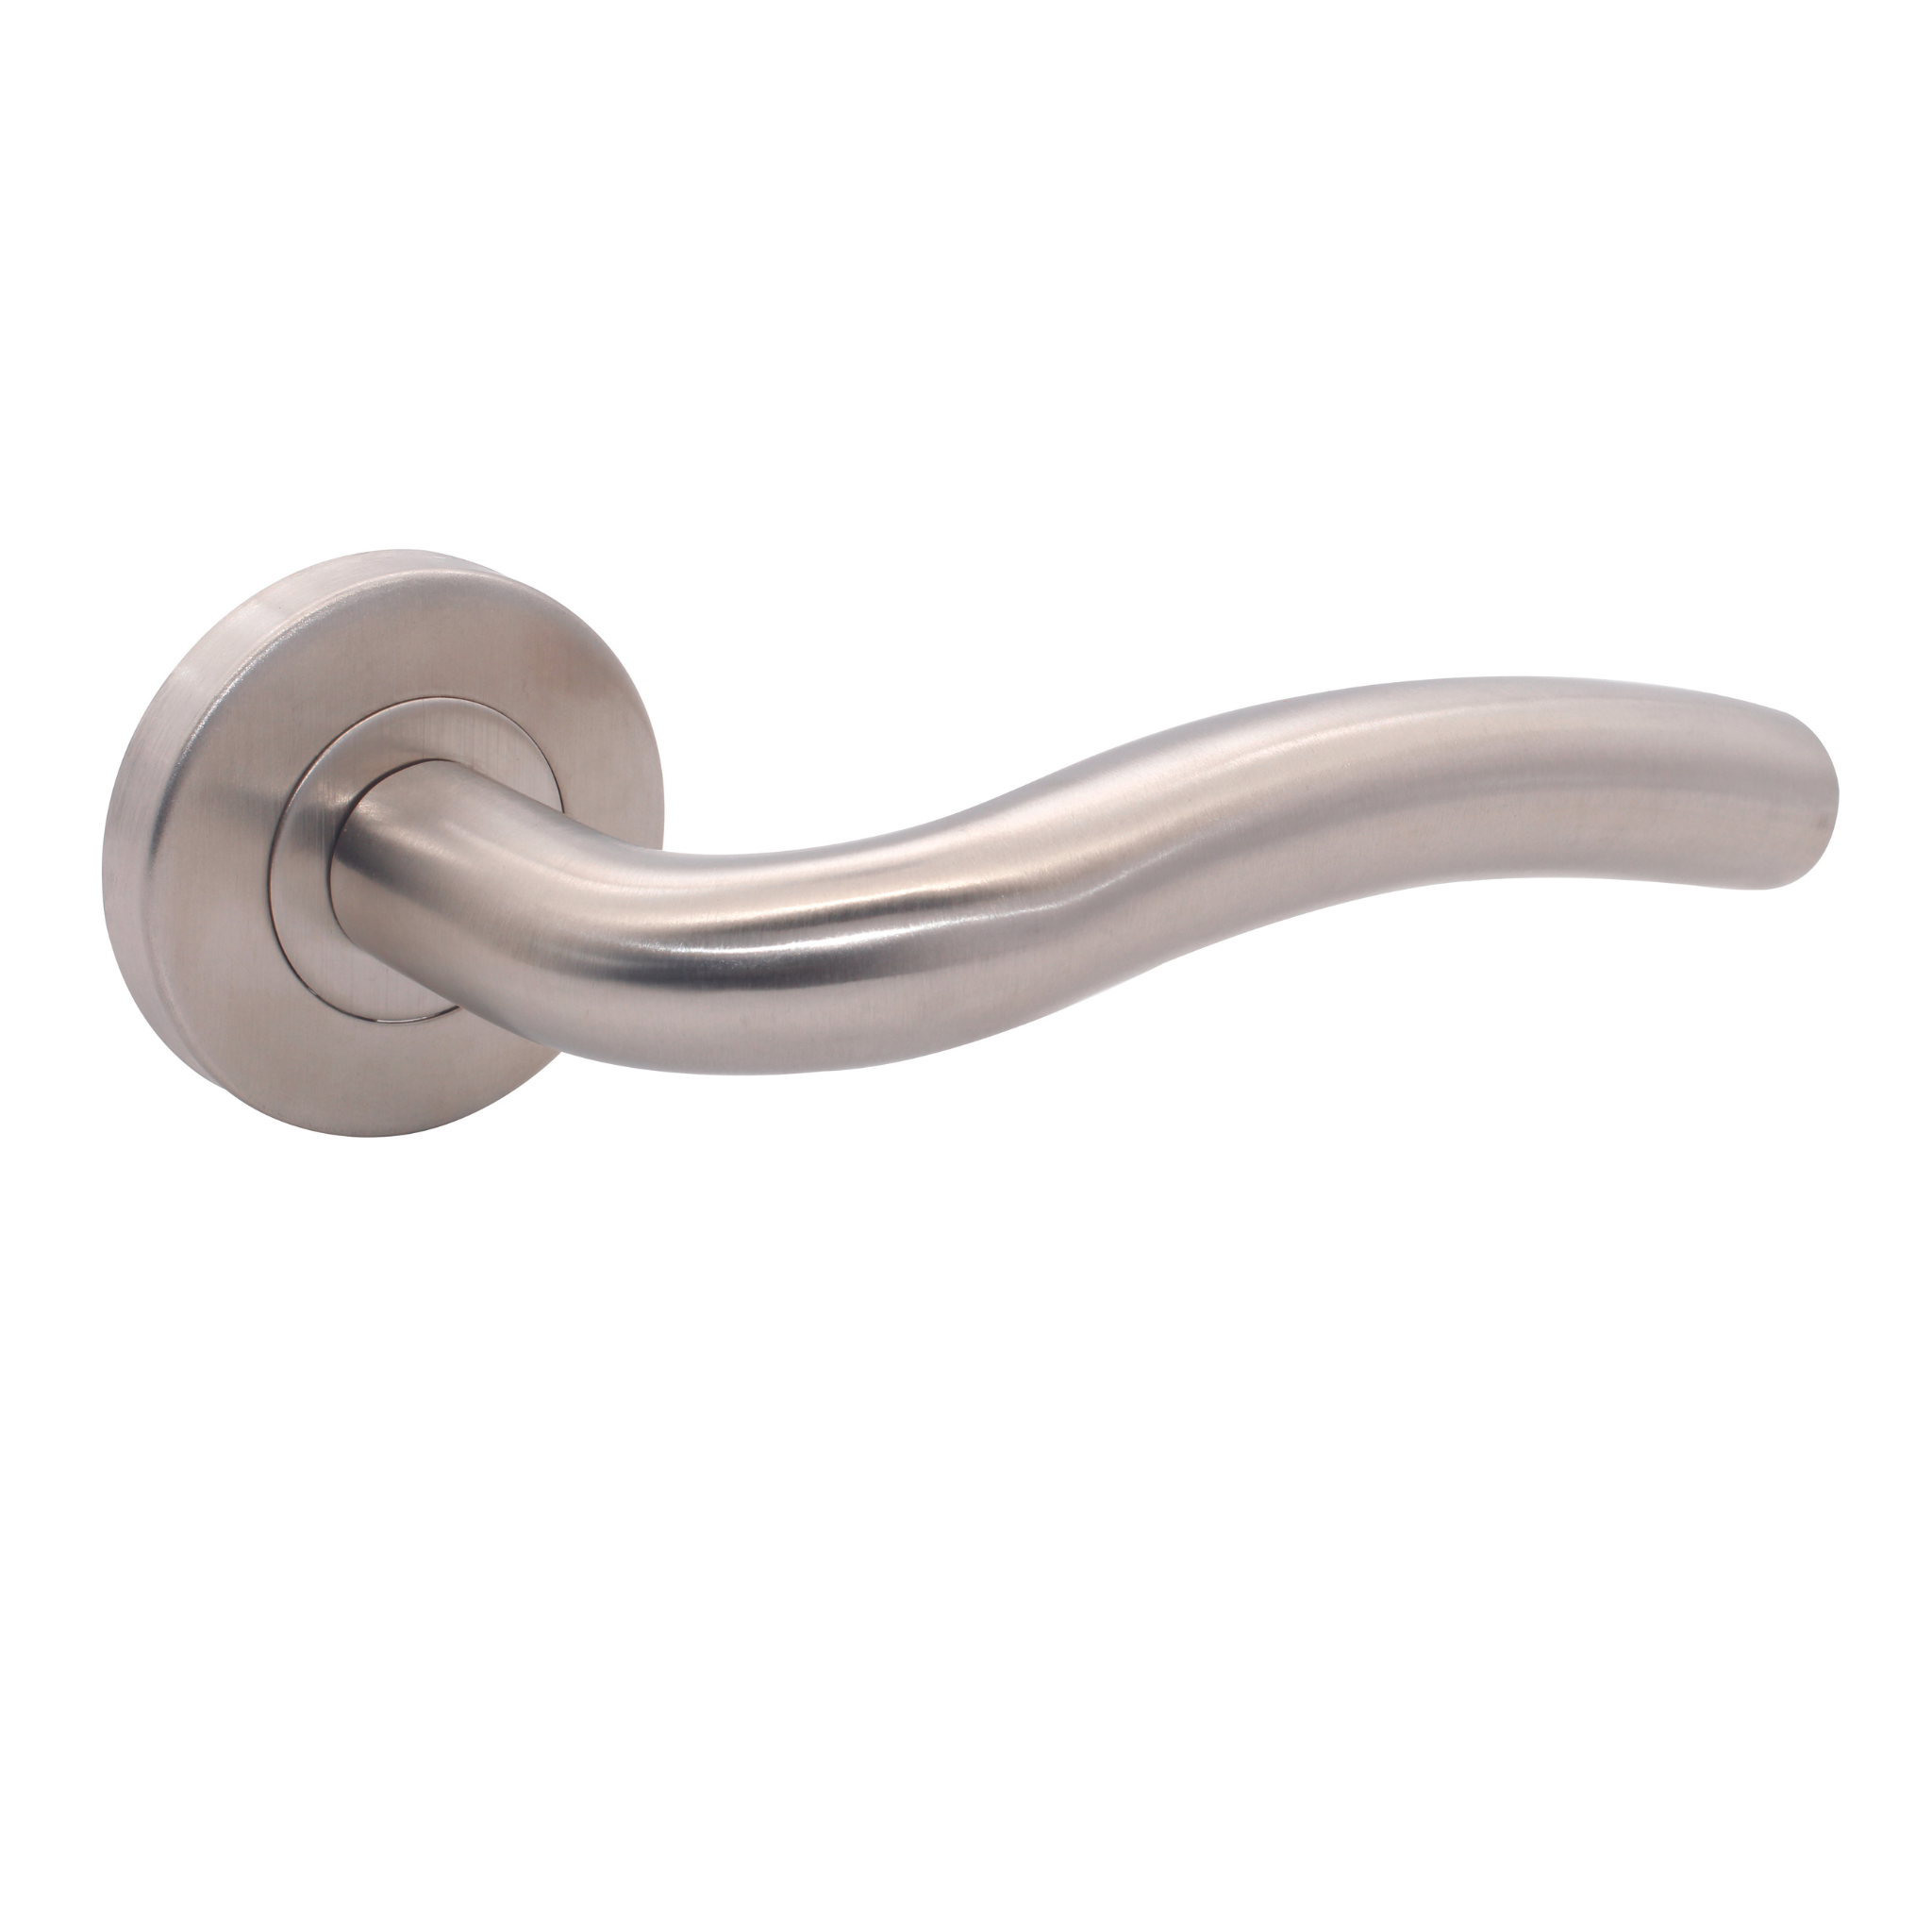 FT12.R._.TR, Lever Handles, Tubular, On Round Rose, With Escutcheons, Stainless Steel with Tarnish Resistant, CISA